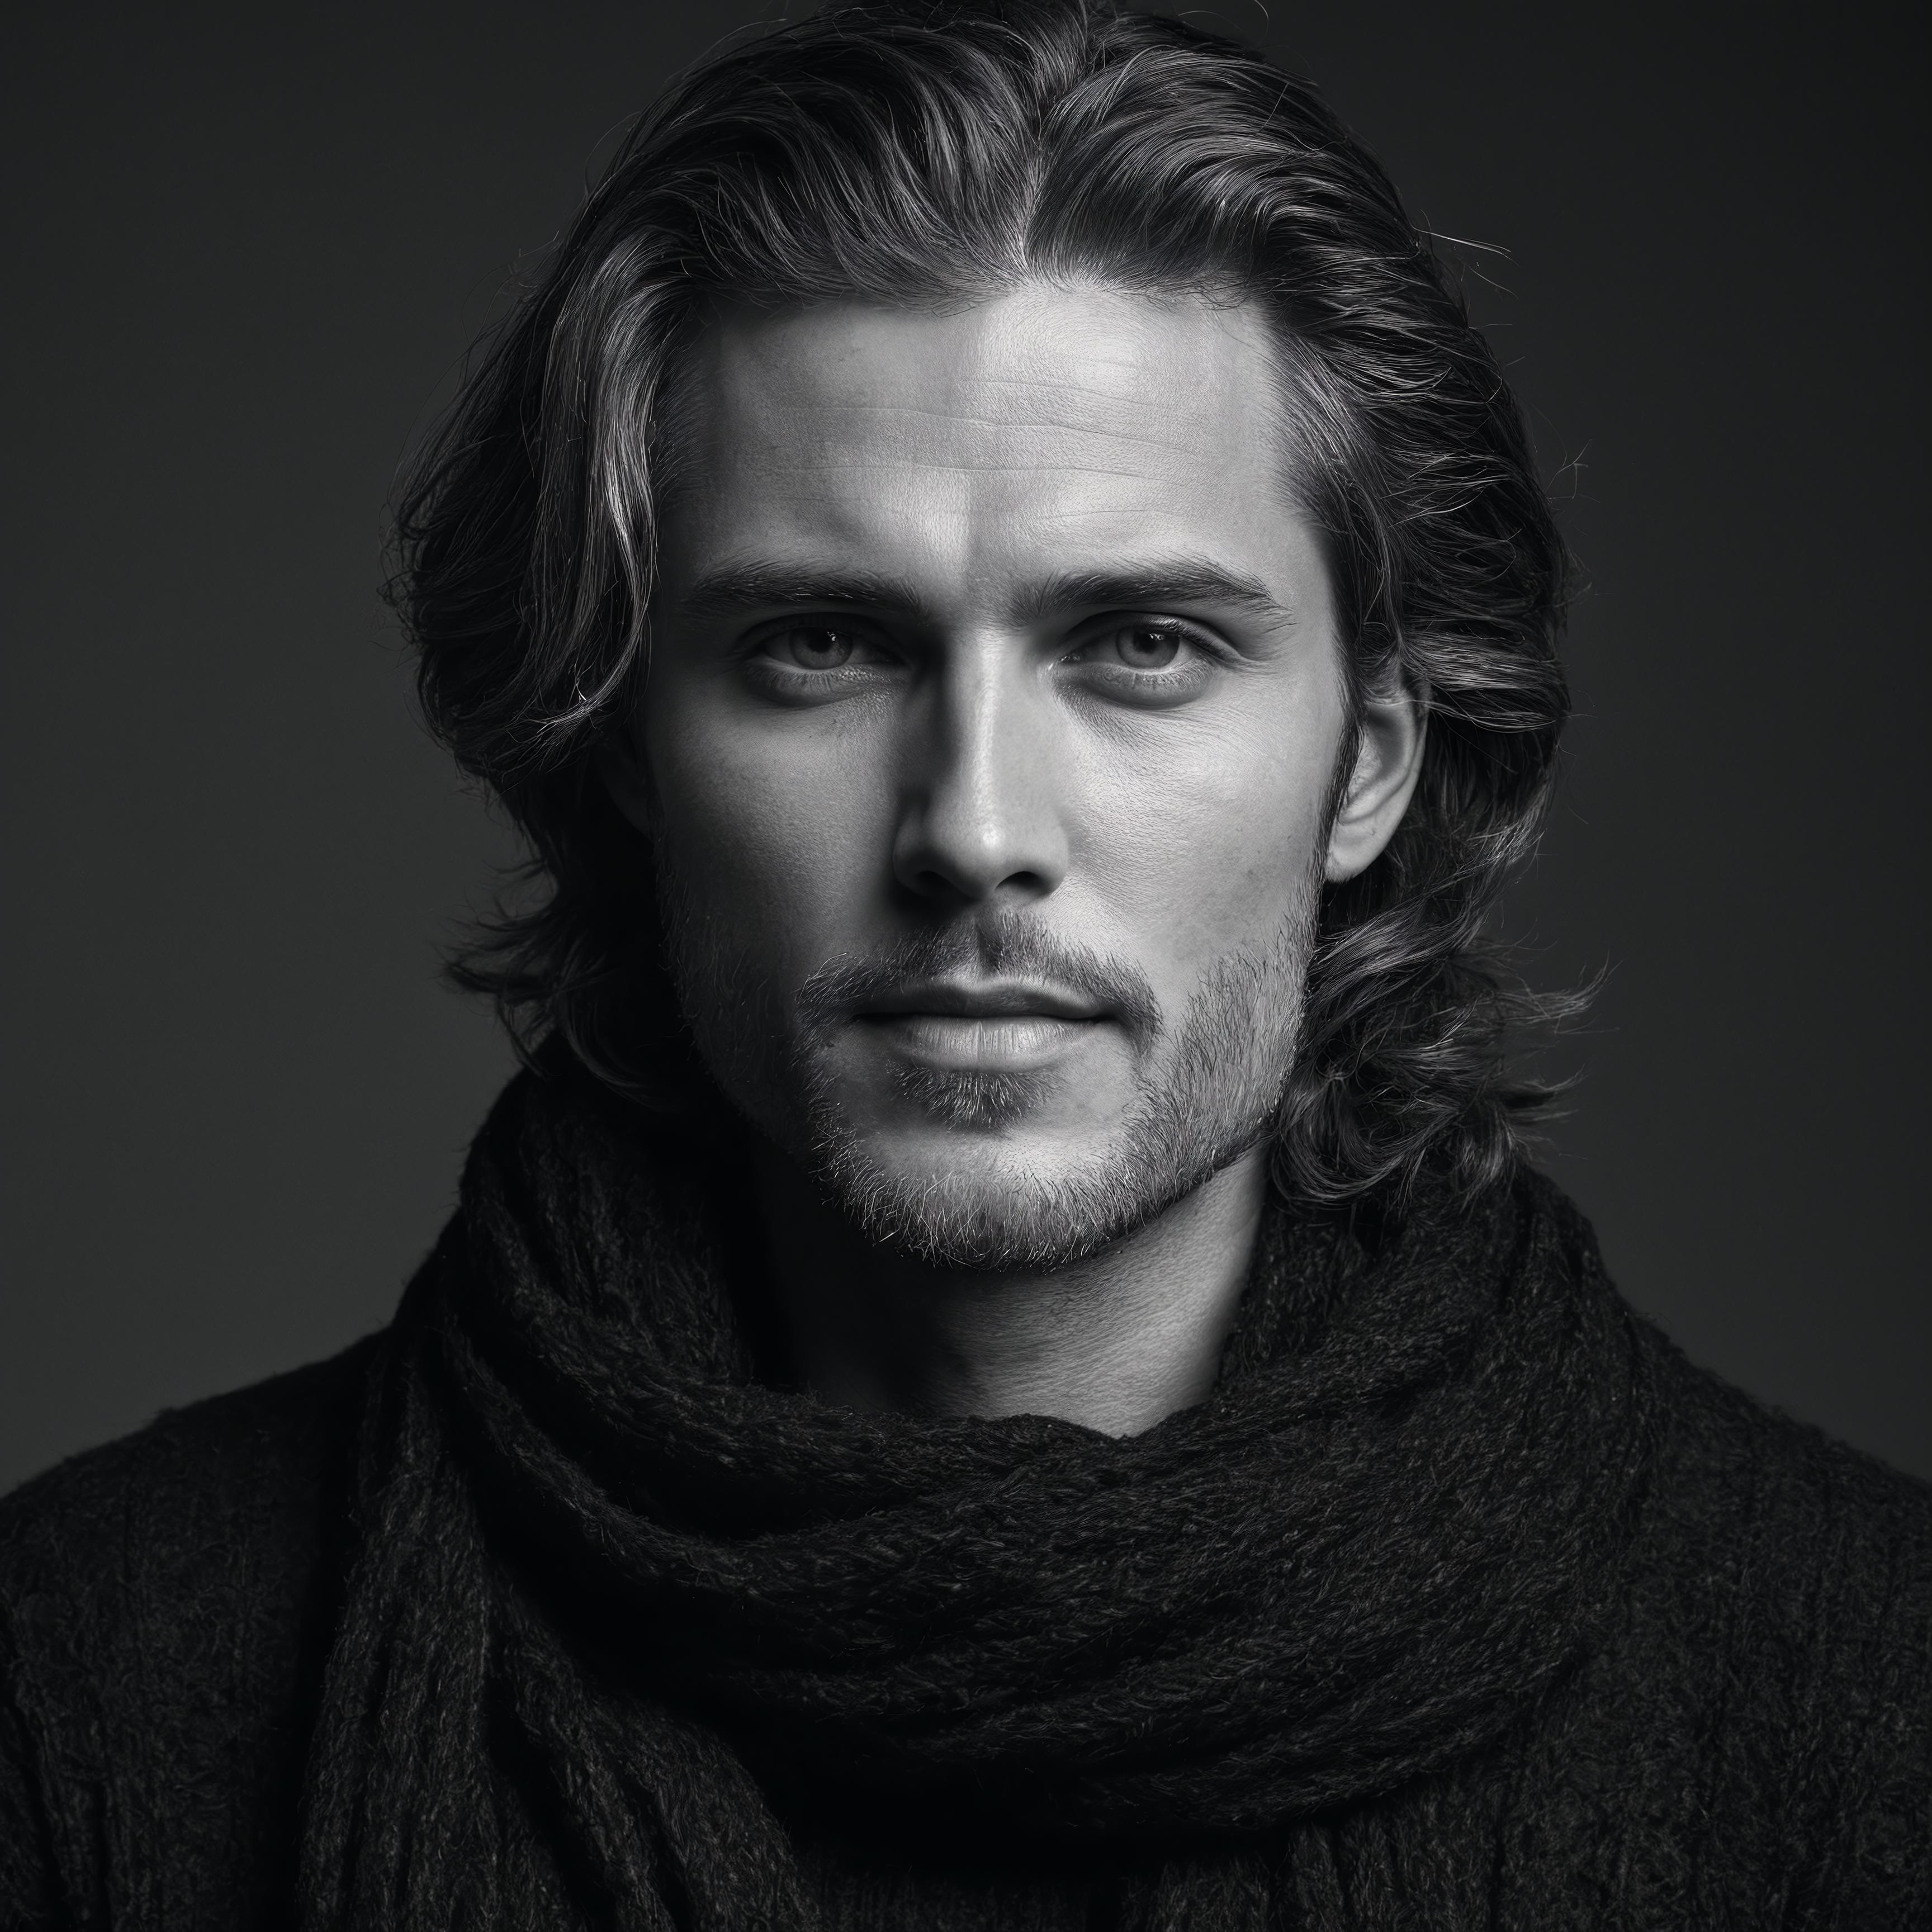 A man with long hair wearing a scarf.